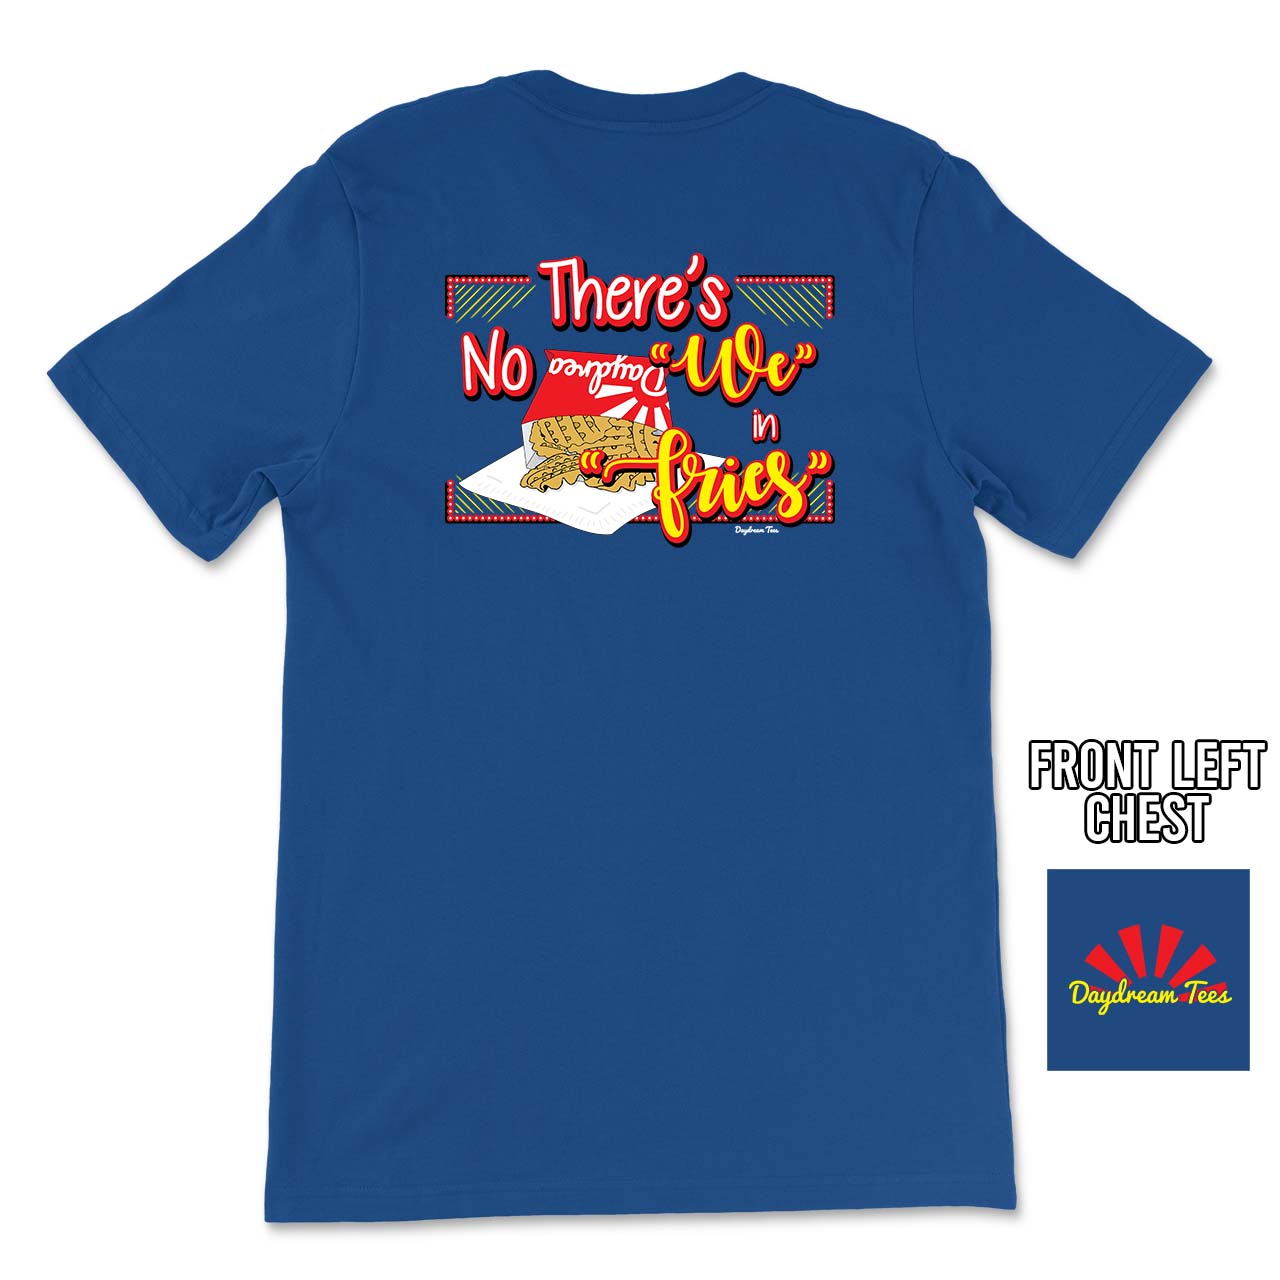 Daydream Tees No "We" In Fries